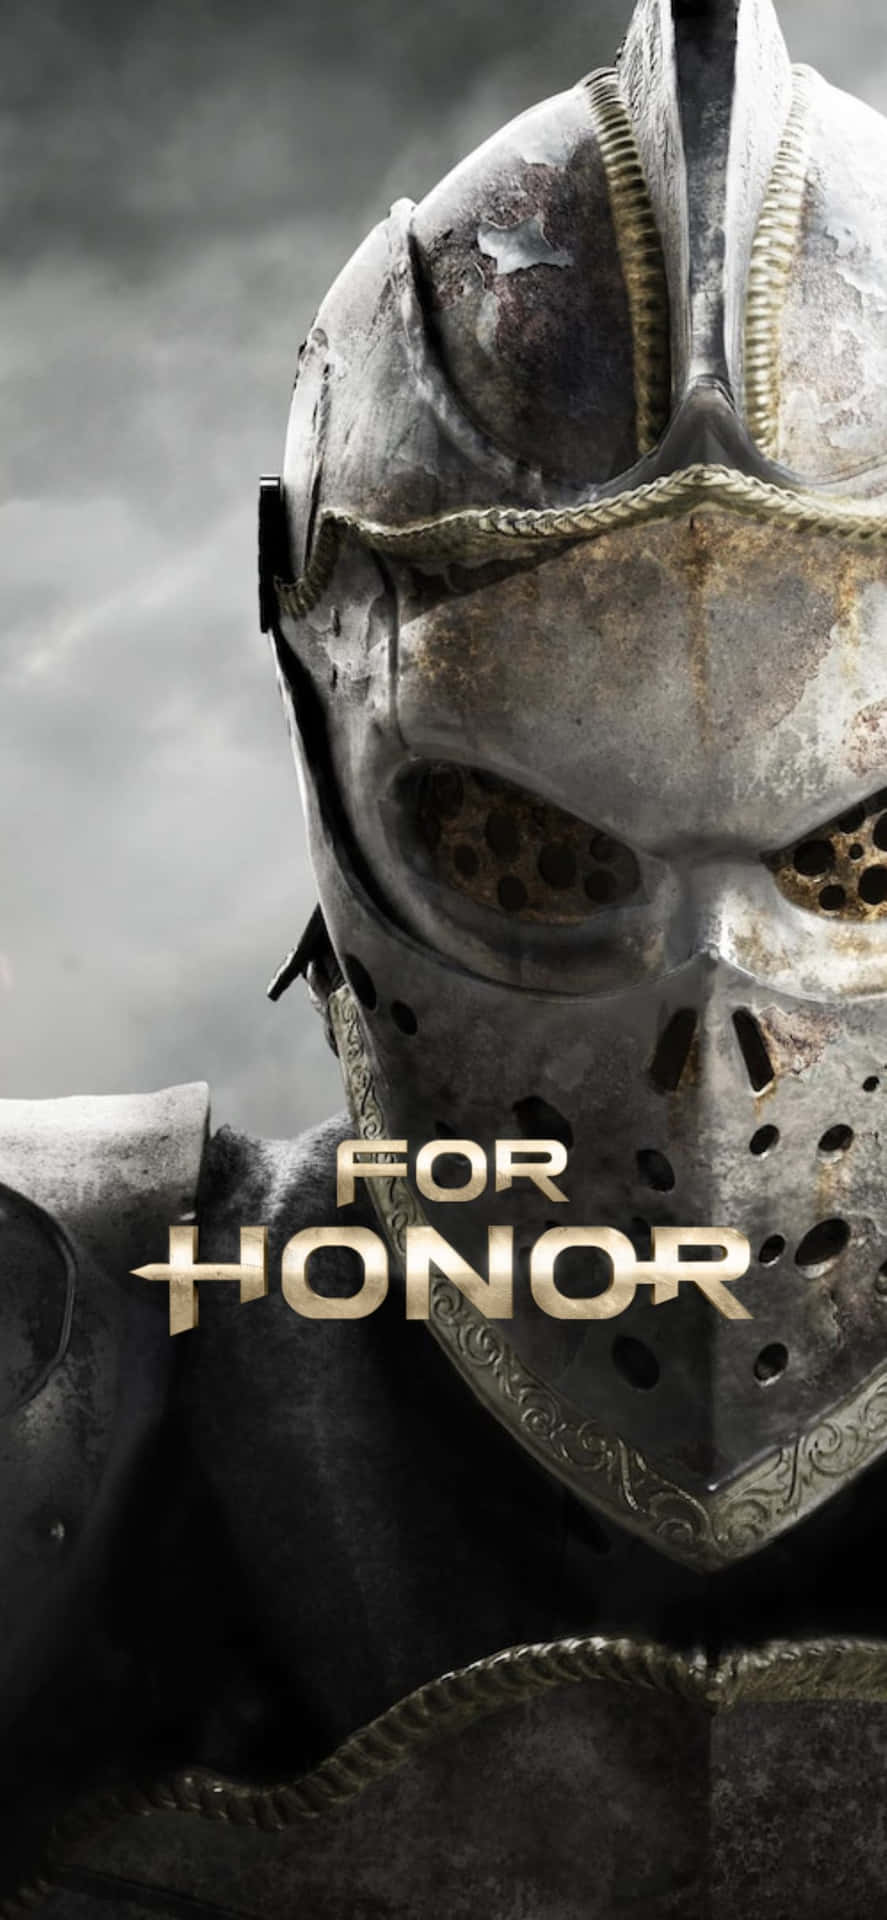 For Honor - Pc - Pc - Pc - Pc - Pc - Pc